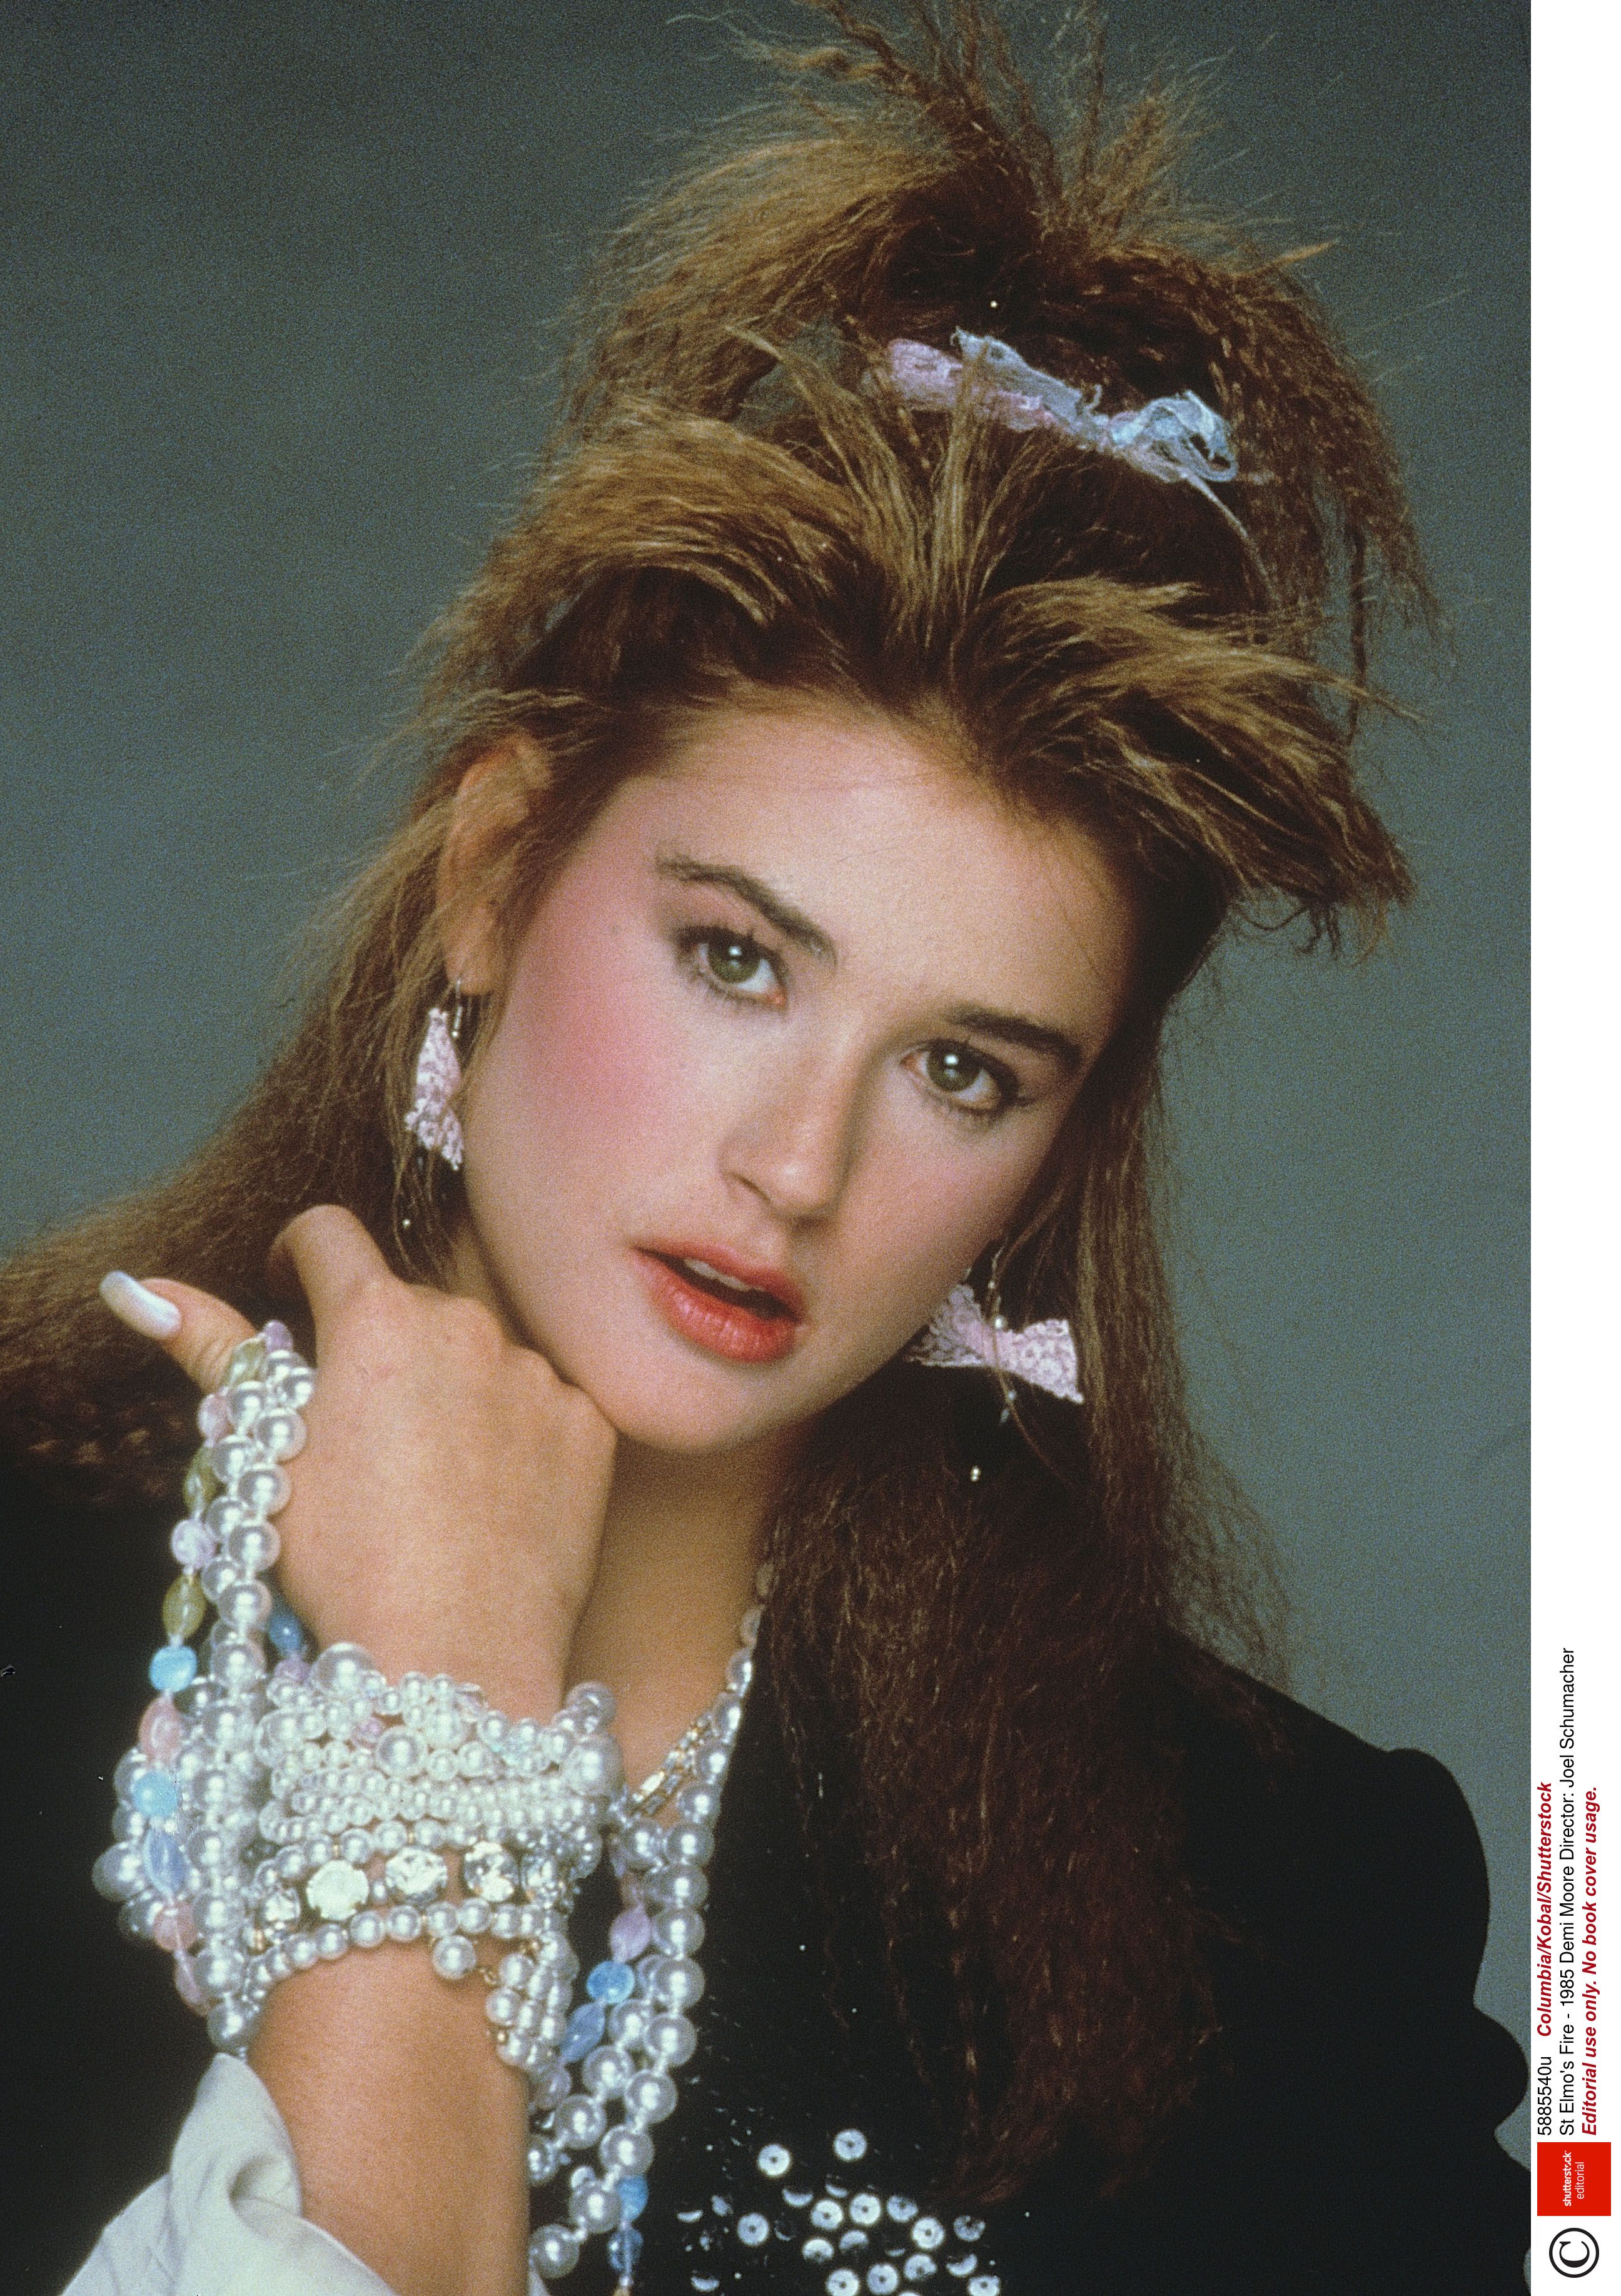 80s Fashion Trends: Top 18 List from the 1980s - Men & Women – Heirloom